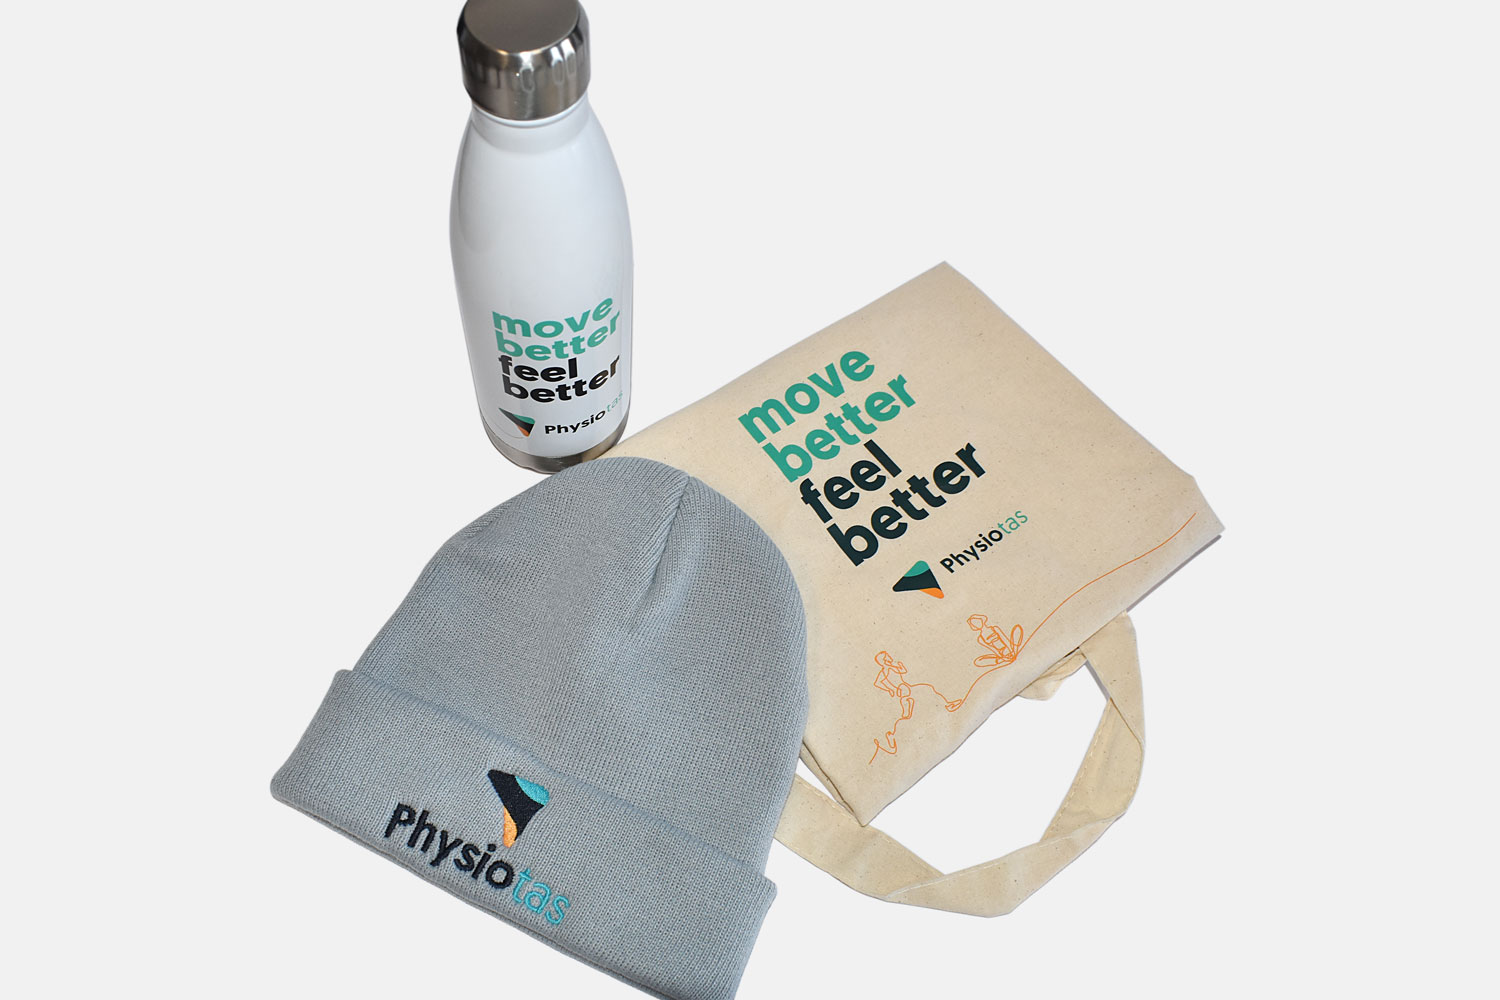 Physio Tas Beanies, Drink Bottles & Calico Tote Bags